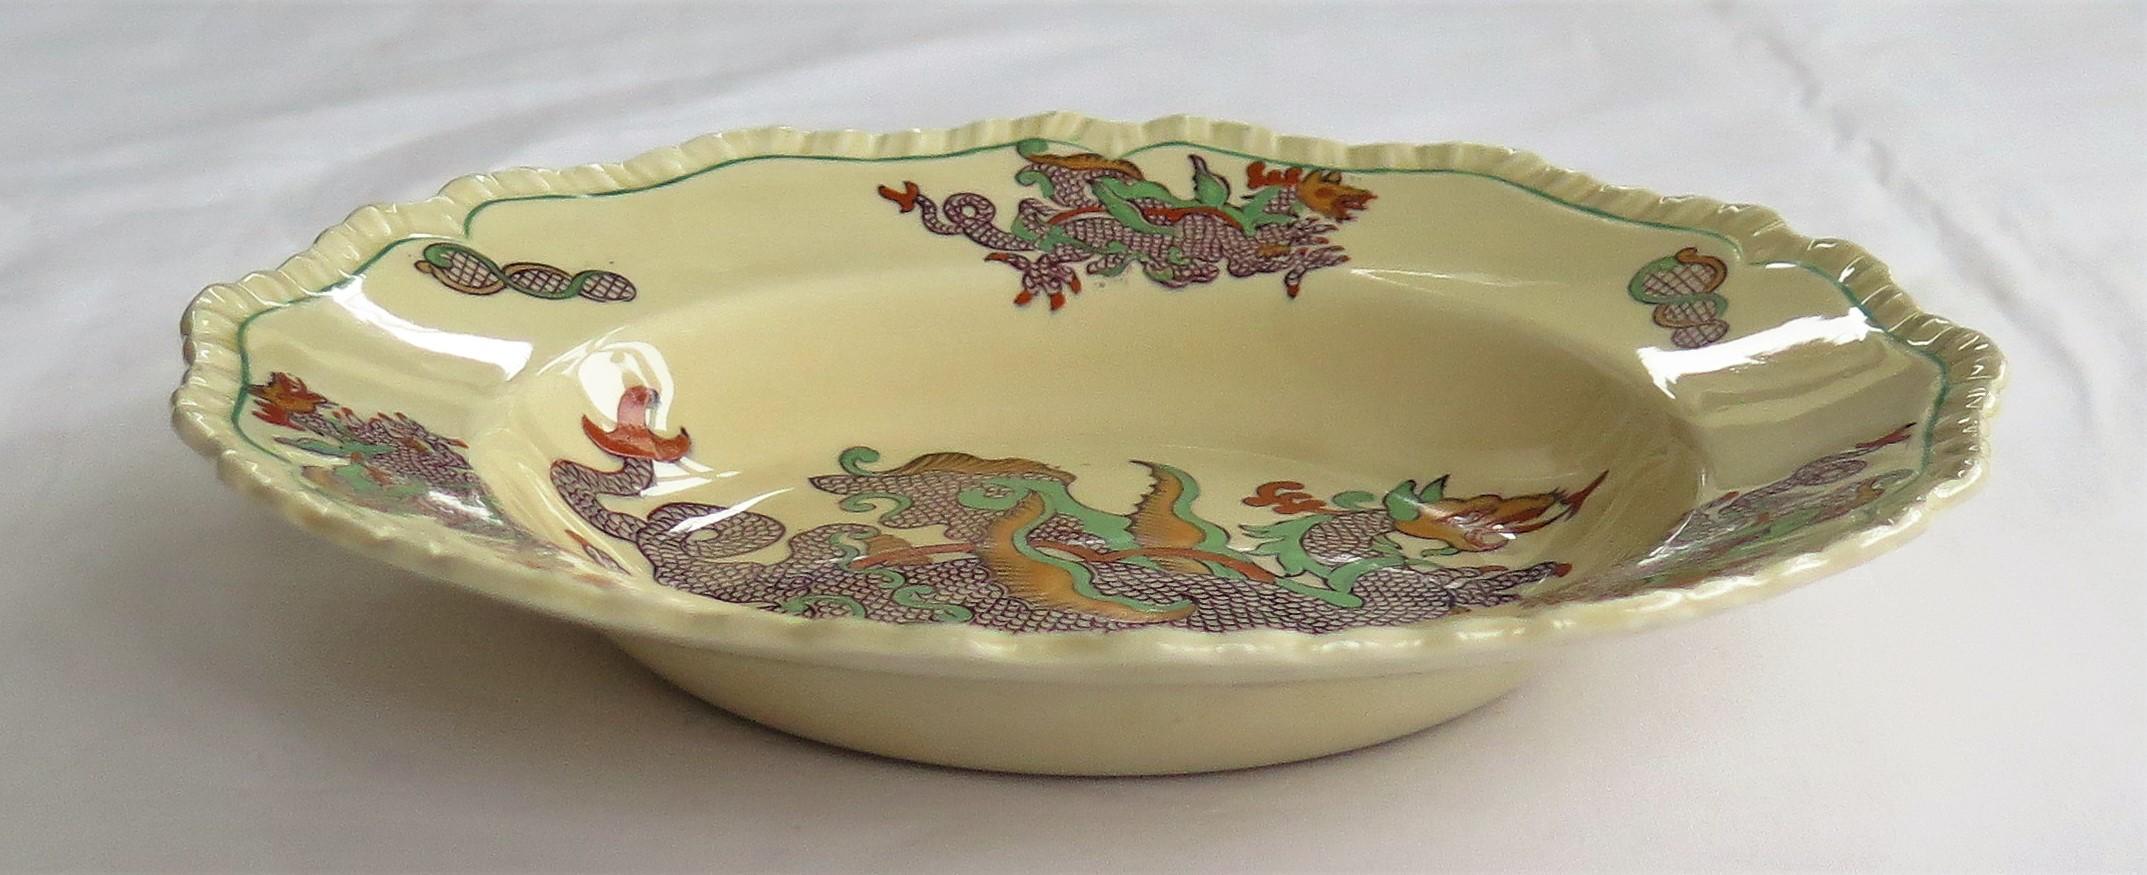 Set of FOUR Masons Ironstone Bowls in Chinese Dragon Pattern, circa 1900 For Sale 6